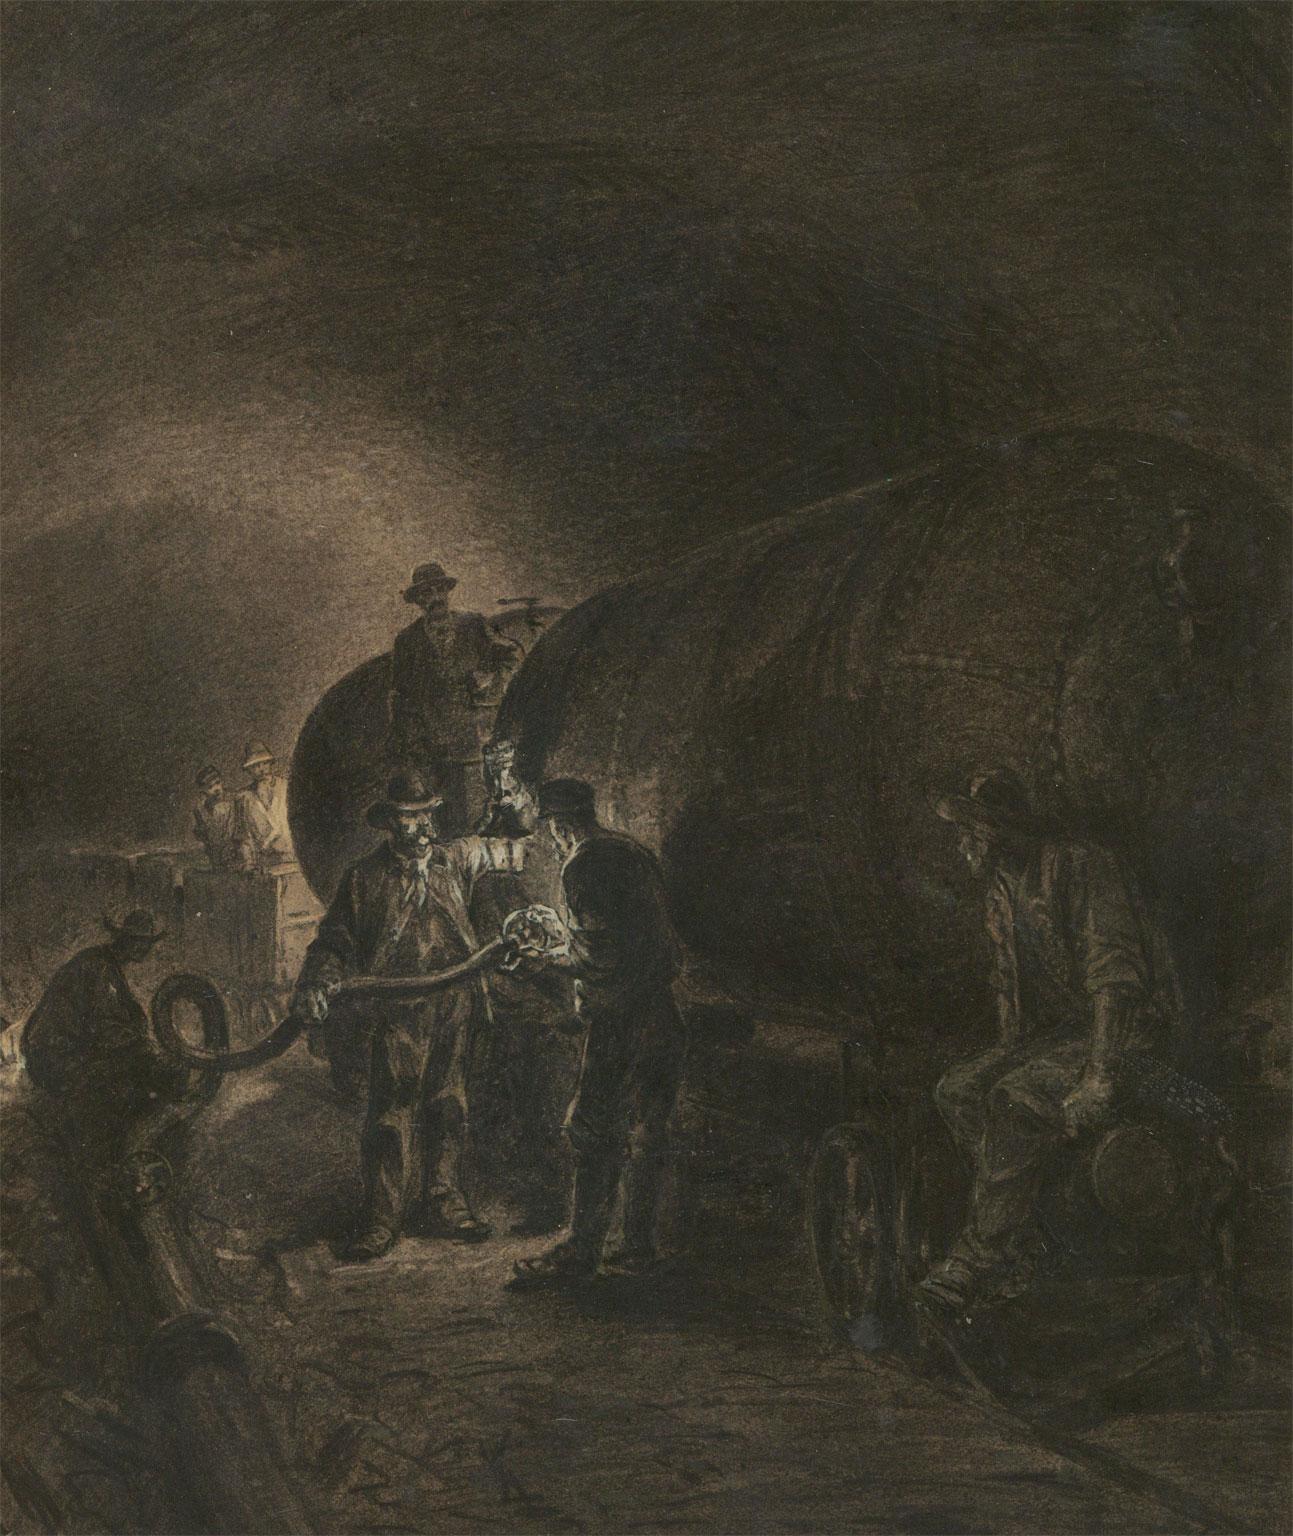 A very fine charcoal with gouache highlights by the well established French painter and illustrator Léon Benett. Benett has maintained a high level detail despite the overall darkness of the charcoal medium. The scene depicts a number of figures by